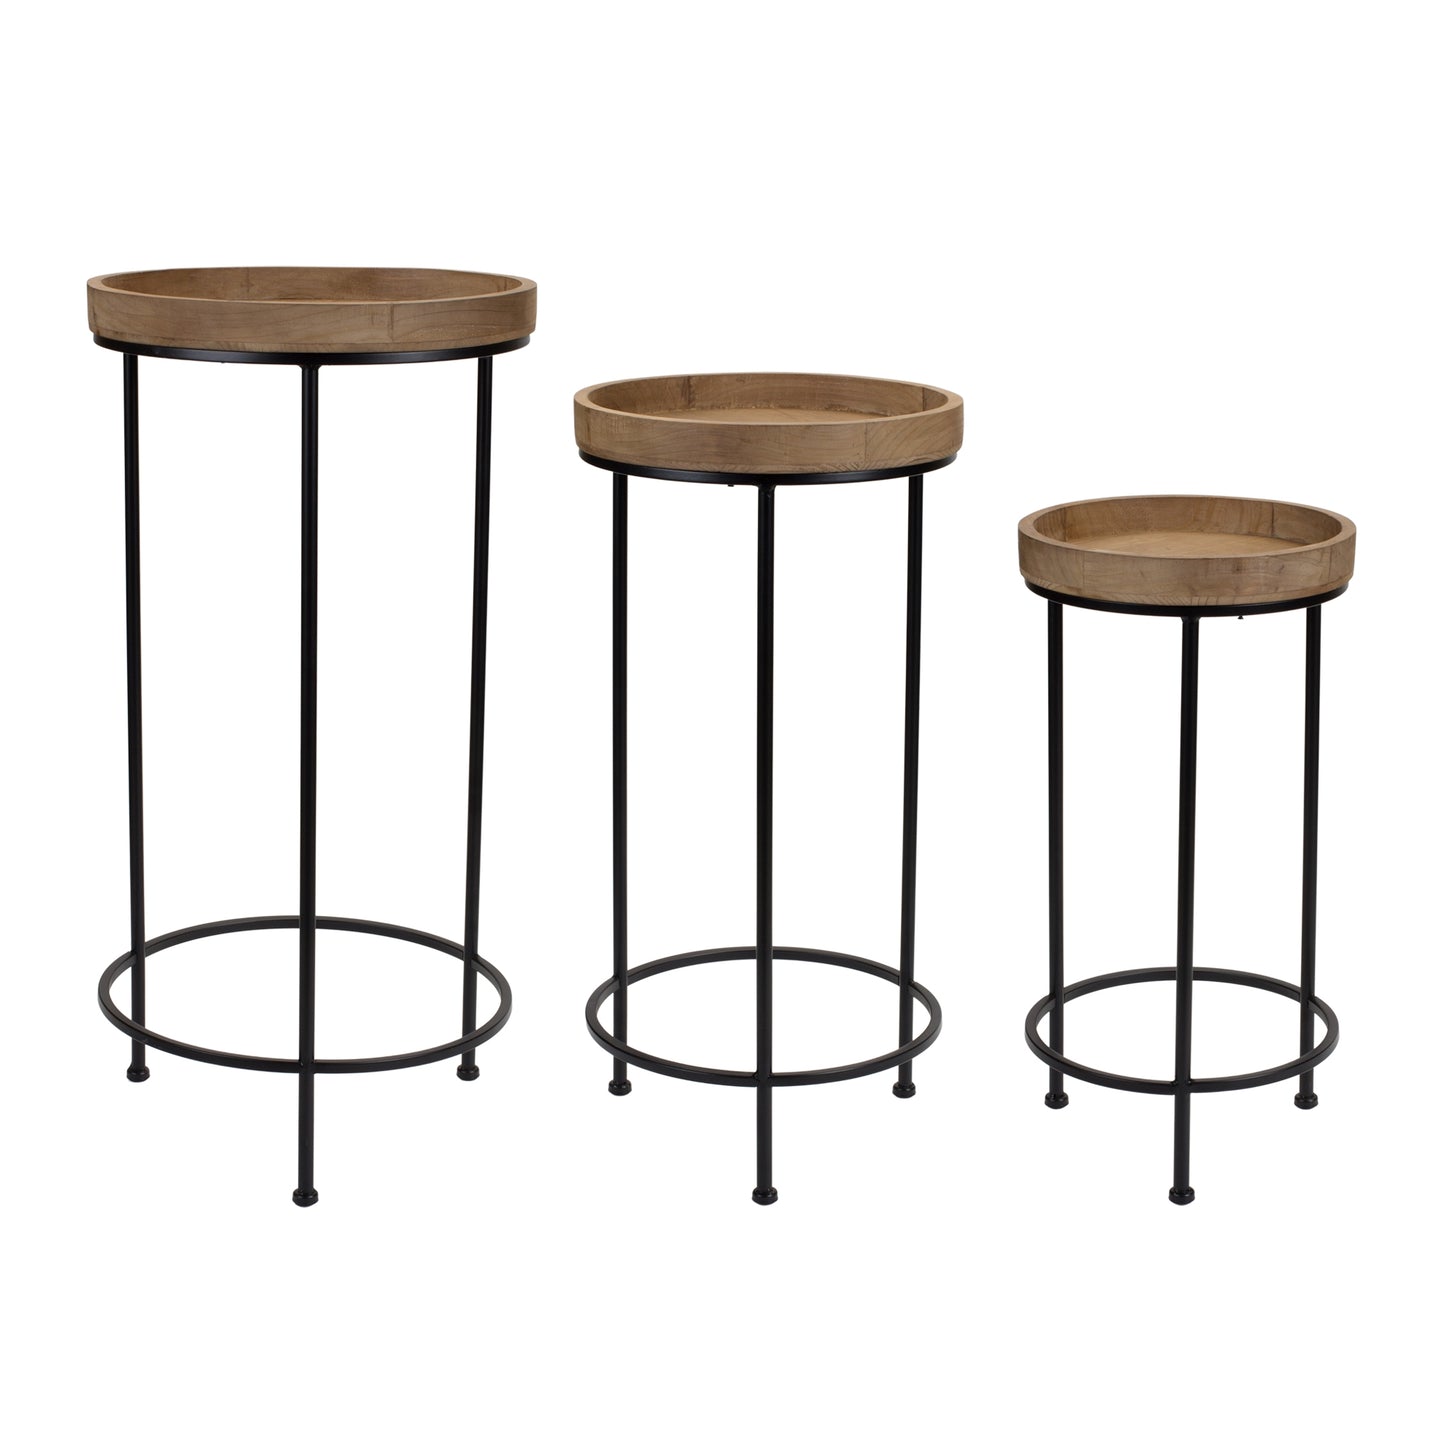 Round Wood and Metal Plant Stand Table (Set of 2)